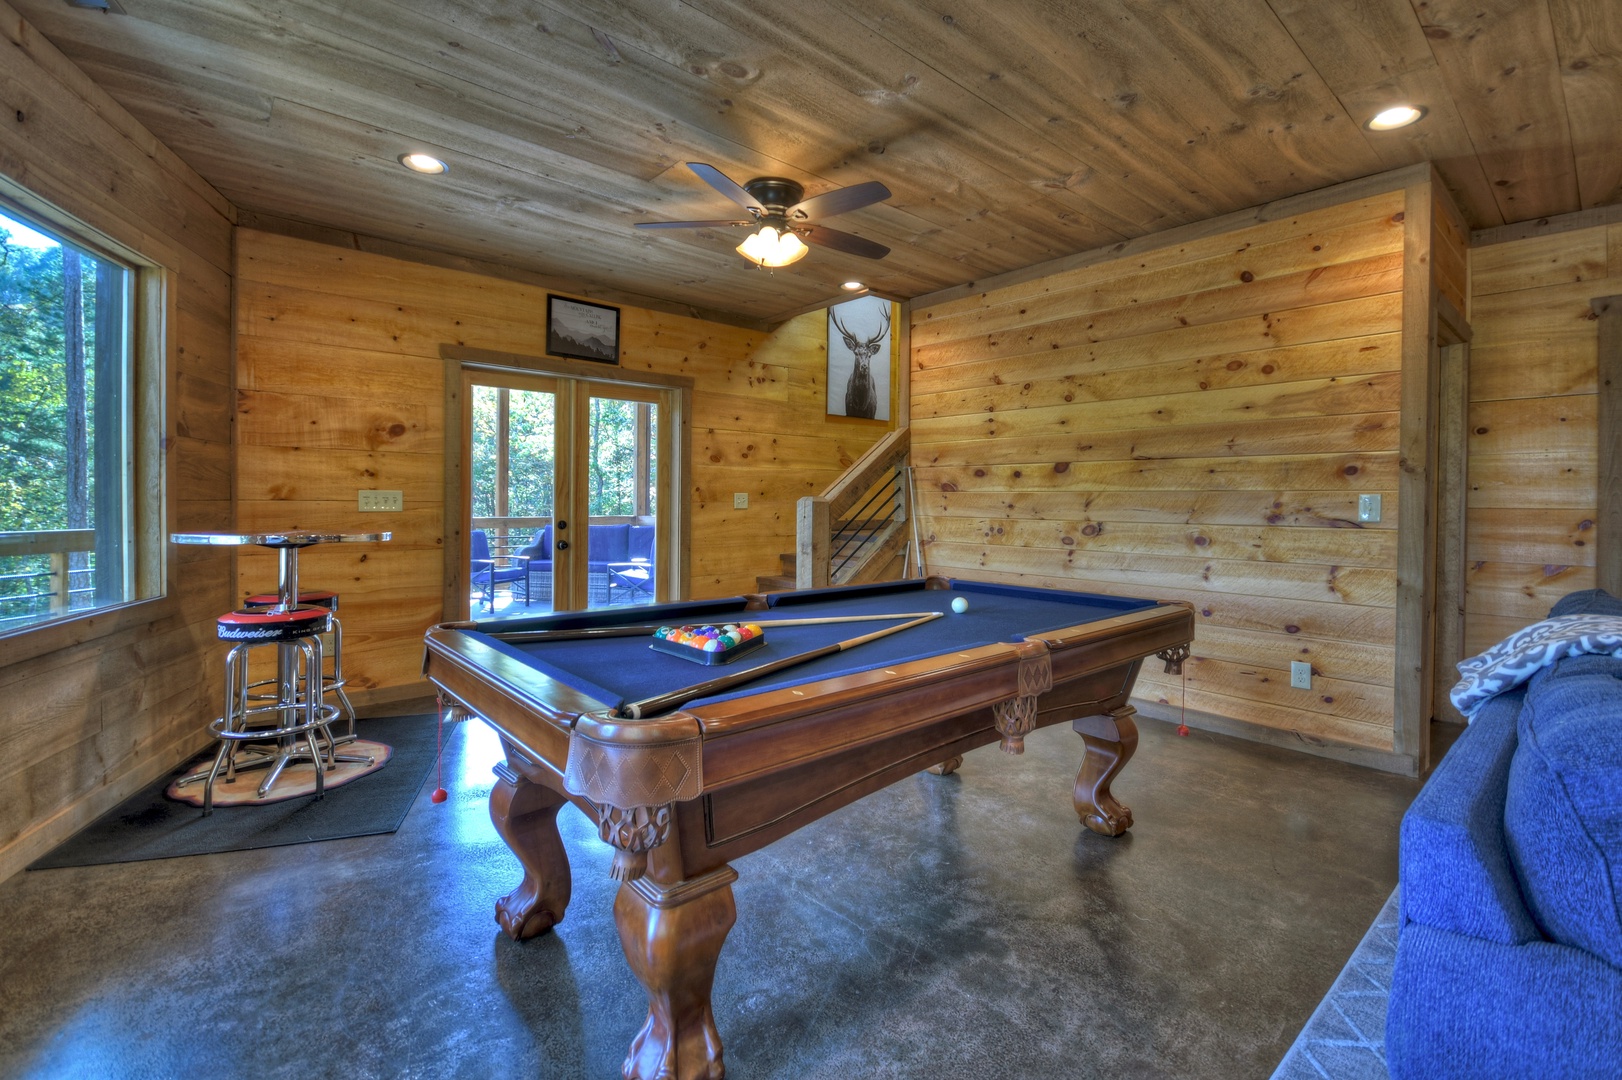 Cedar Ridge- Lower level den area with a card table and pool table